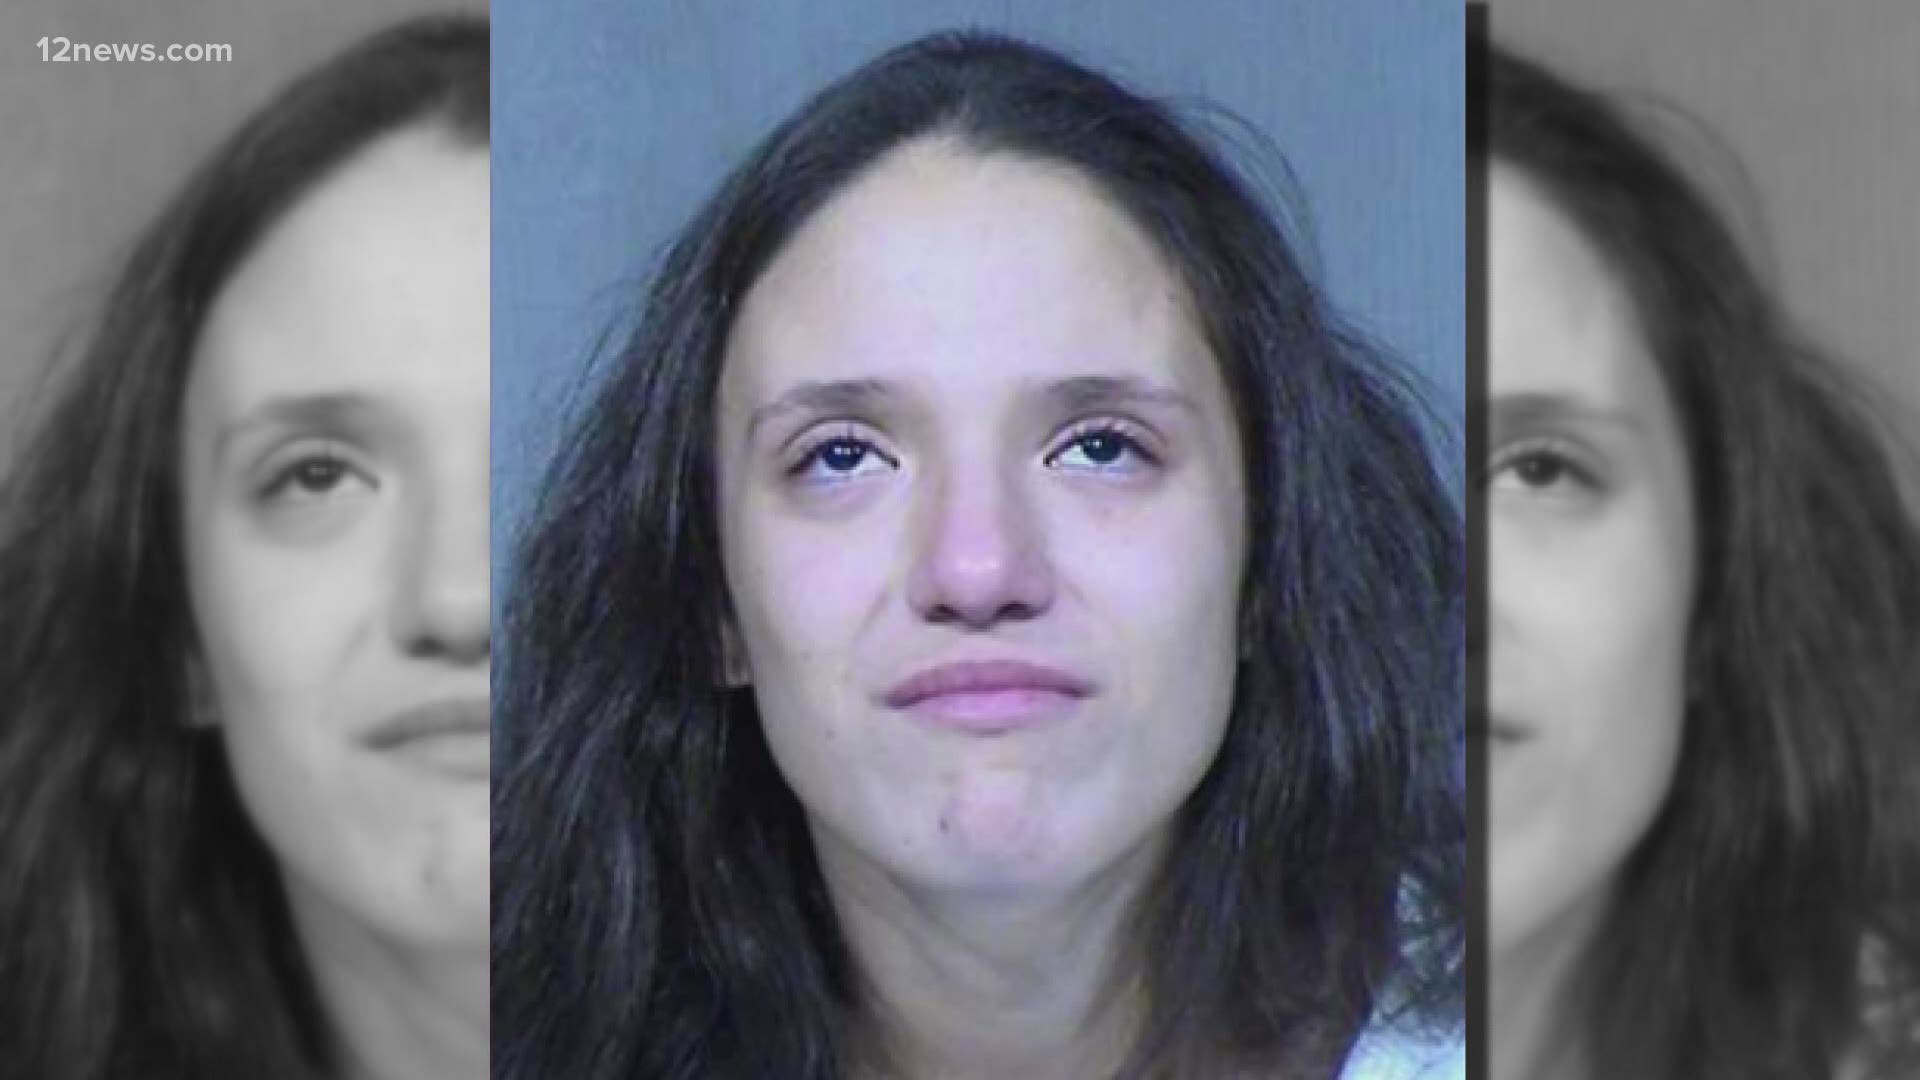 Rachel Henry is accused of smothering the three children to death at a relative's home in south Phoenix in January.